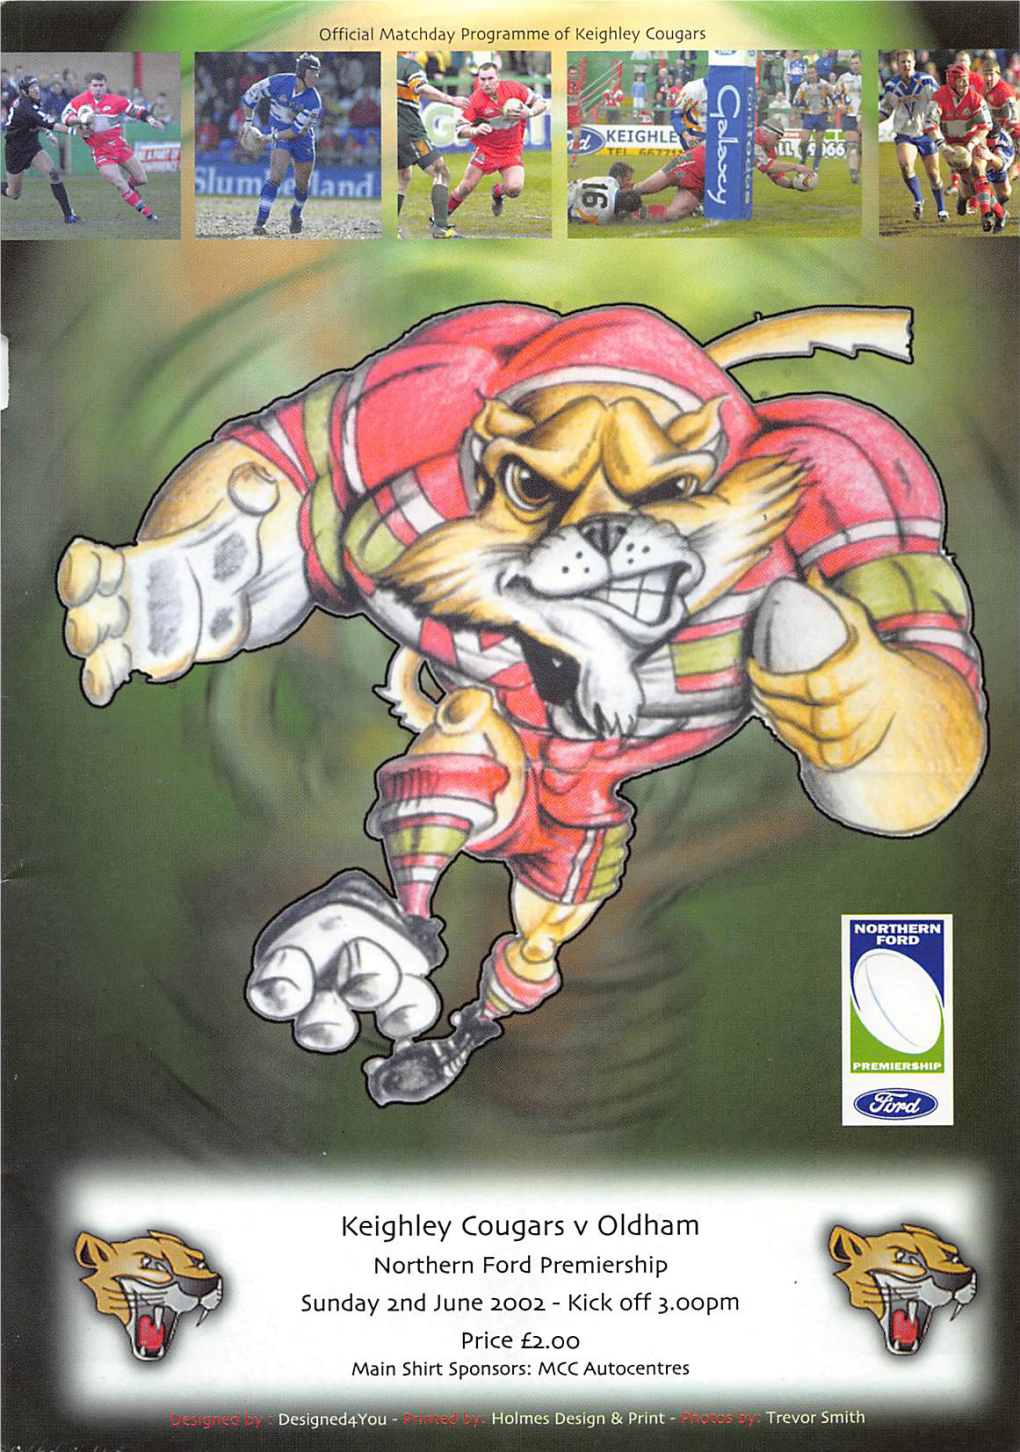 Keighley Cougars Voldham 4V Northern Ford Premiership Sunday 2Nd June 2002 -Kick Off 3.00Pm